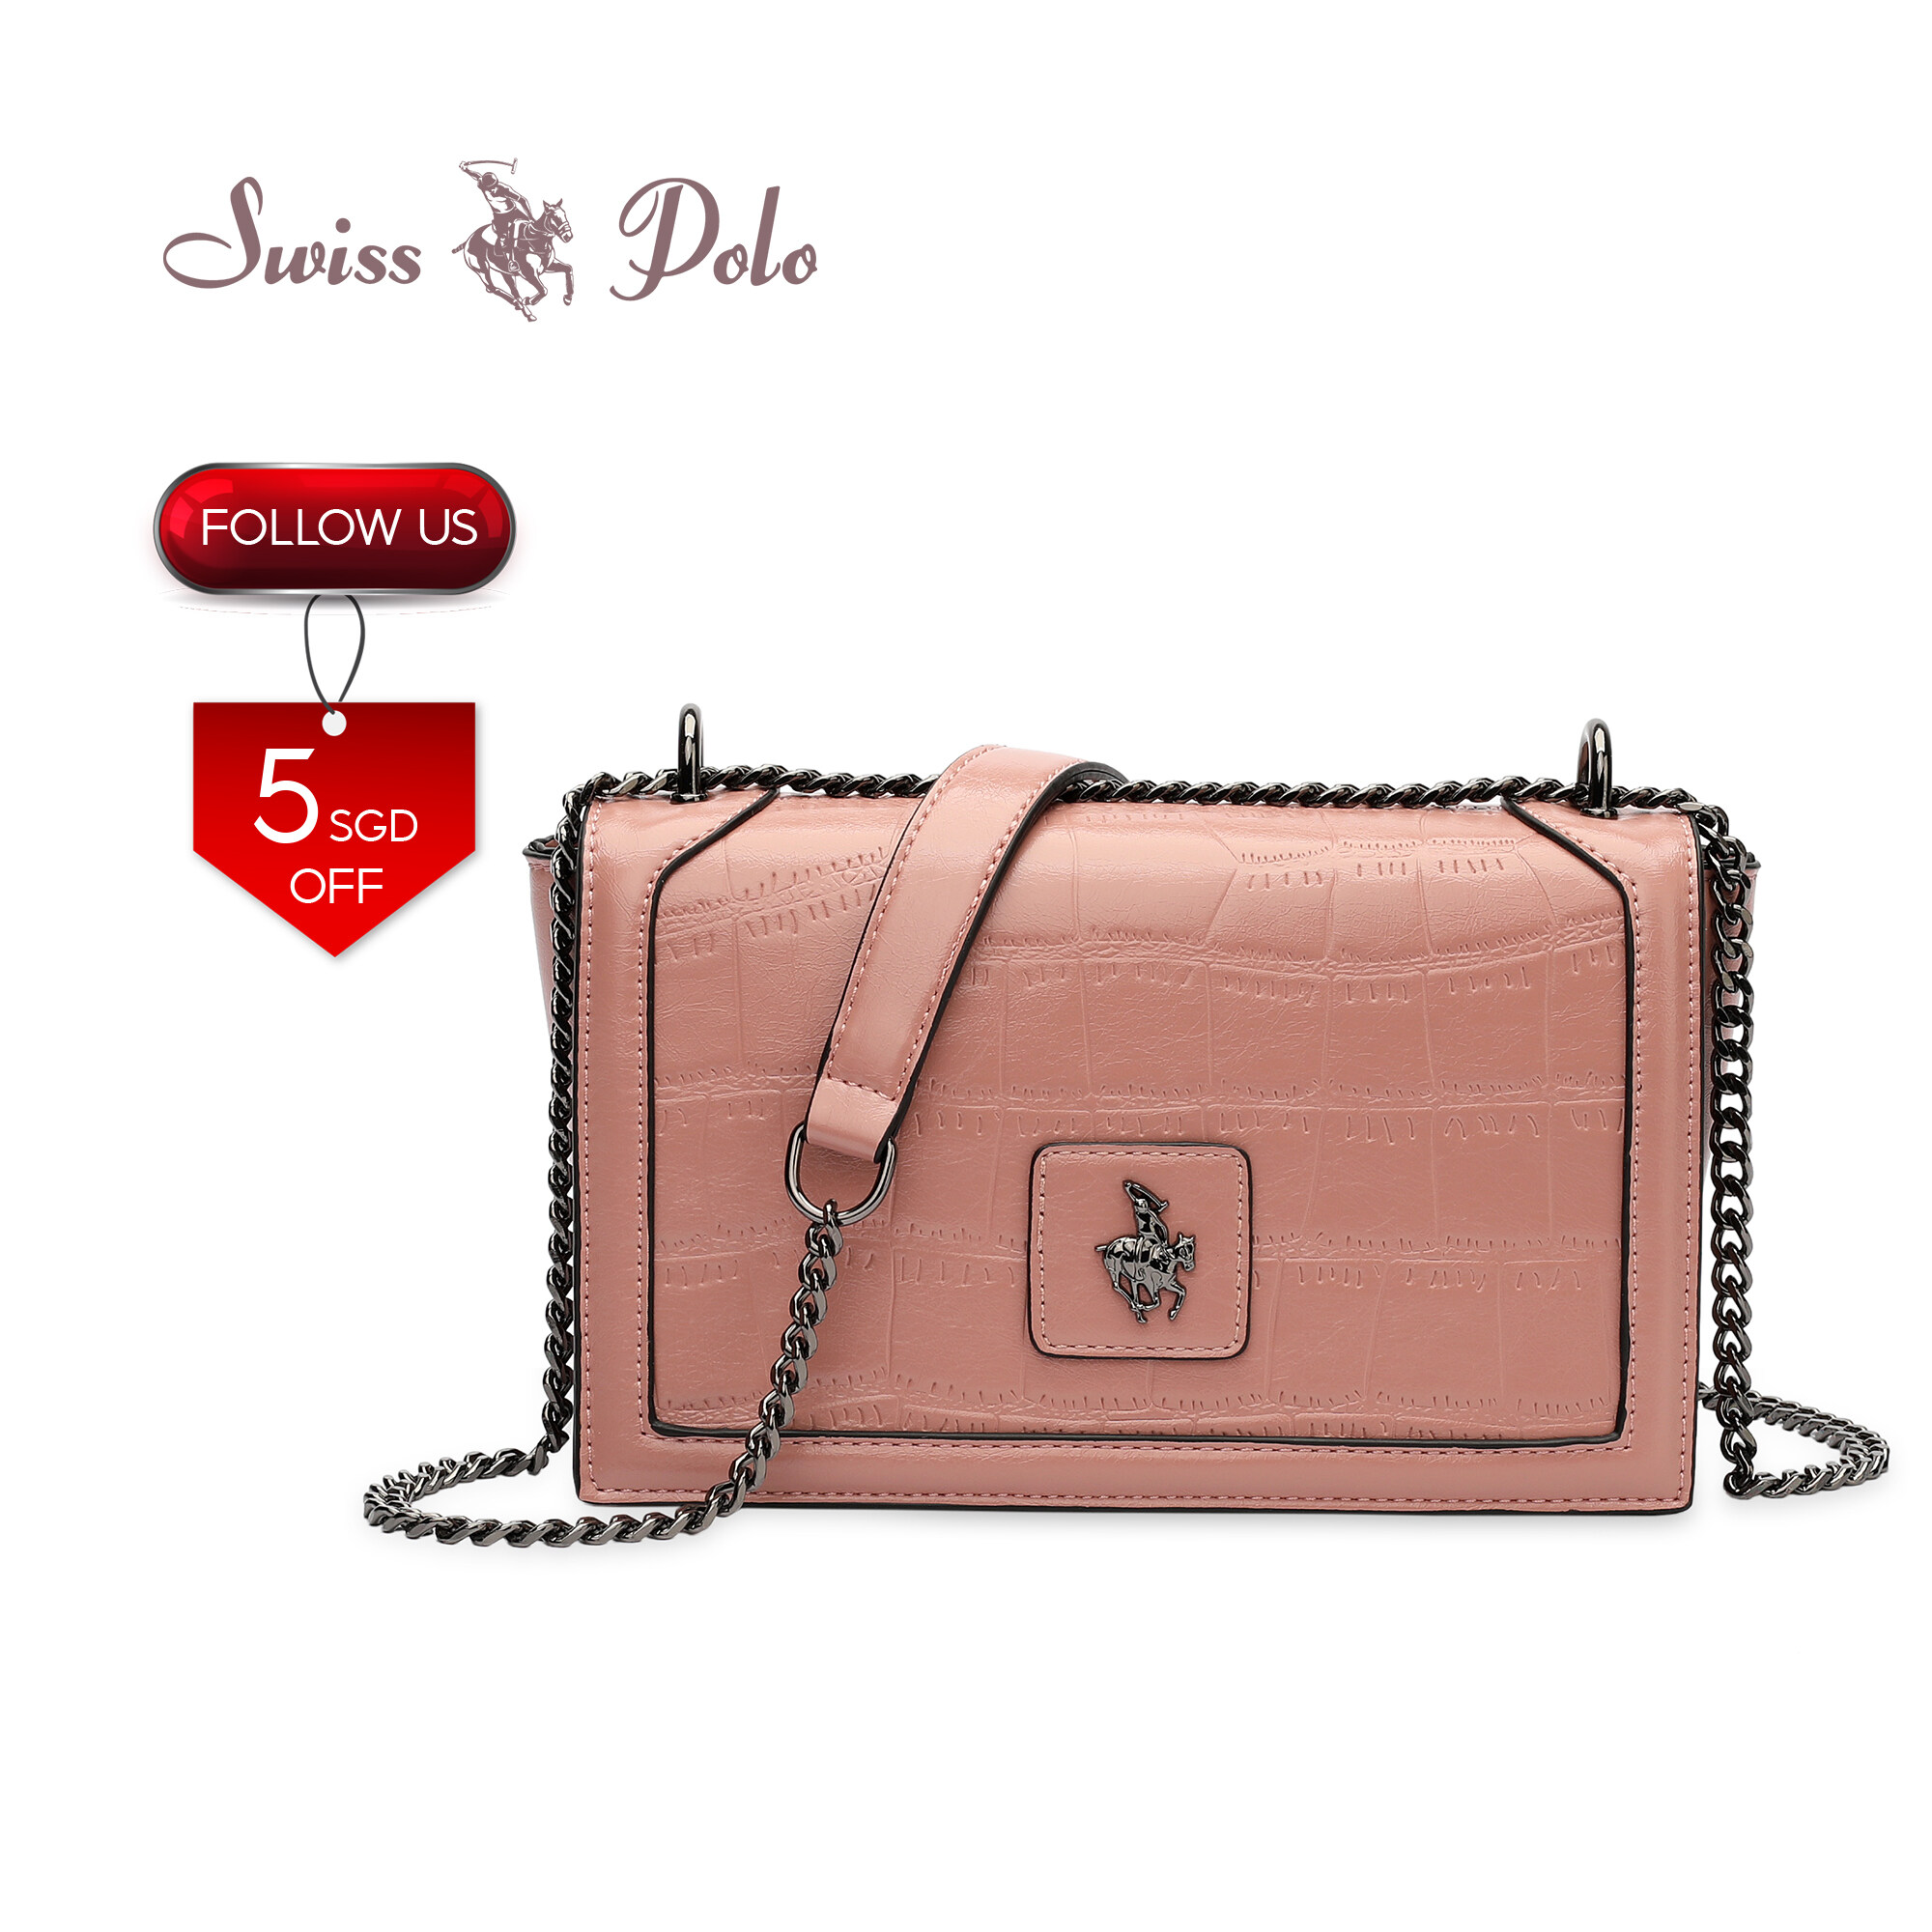 SWISS POLO Ladies Chain Sling Bag HBP 606-3 PINK